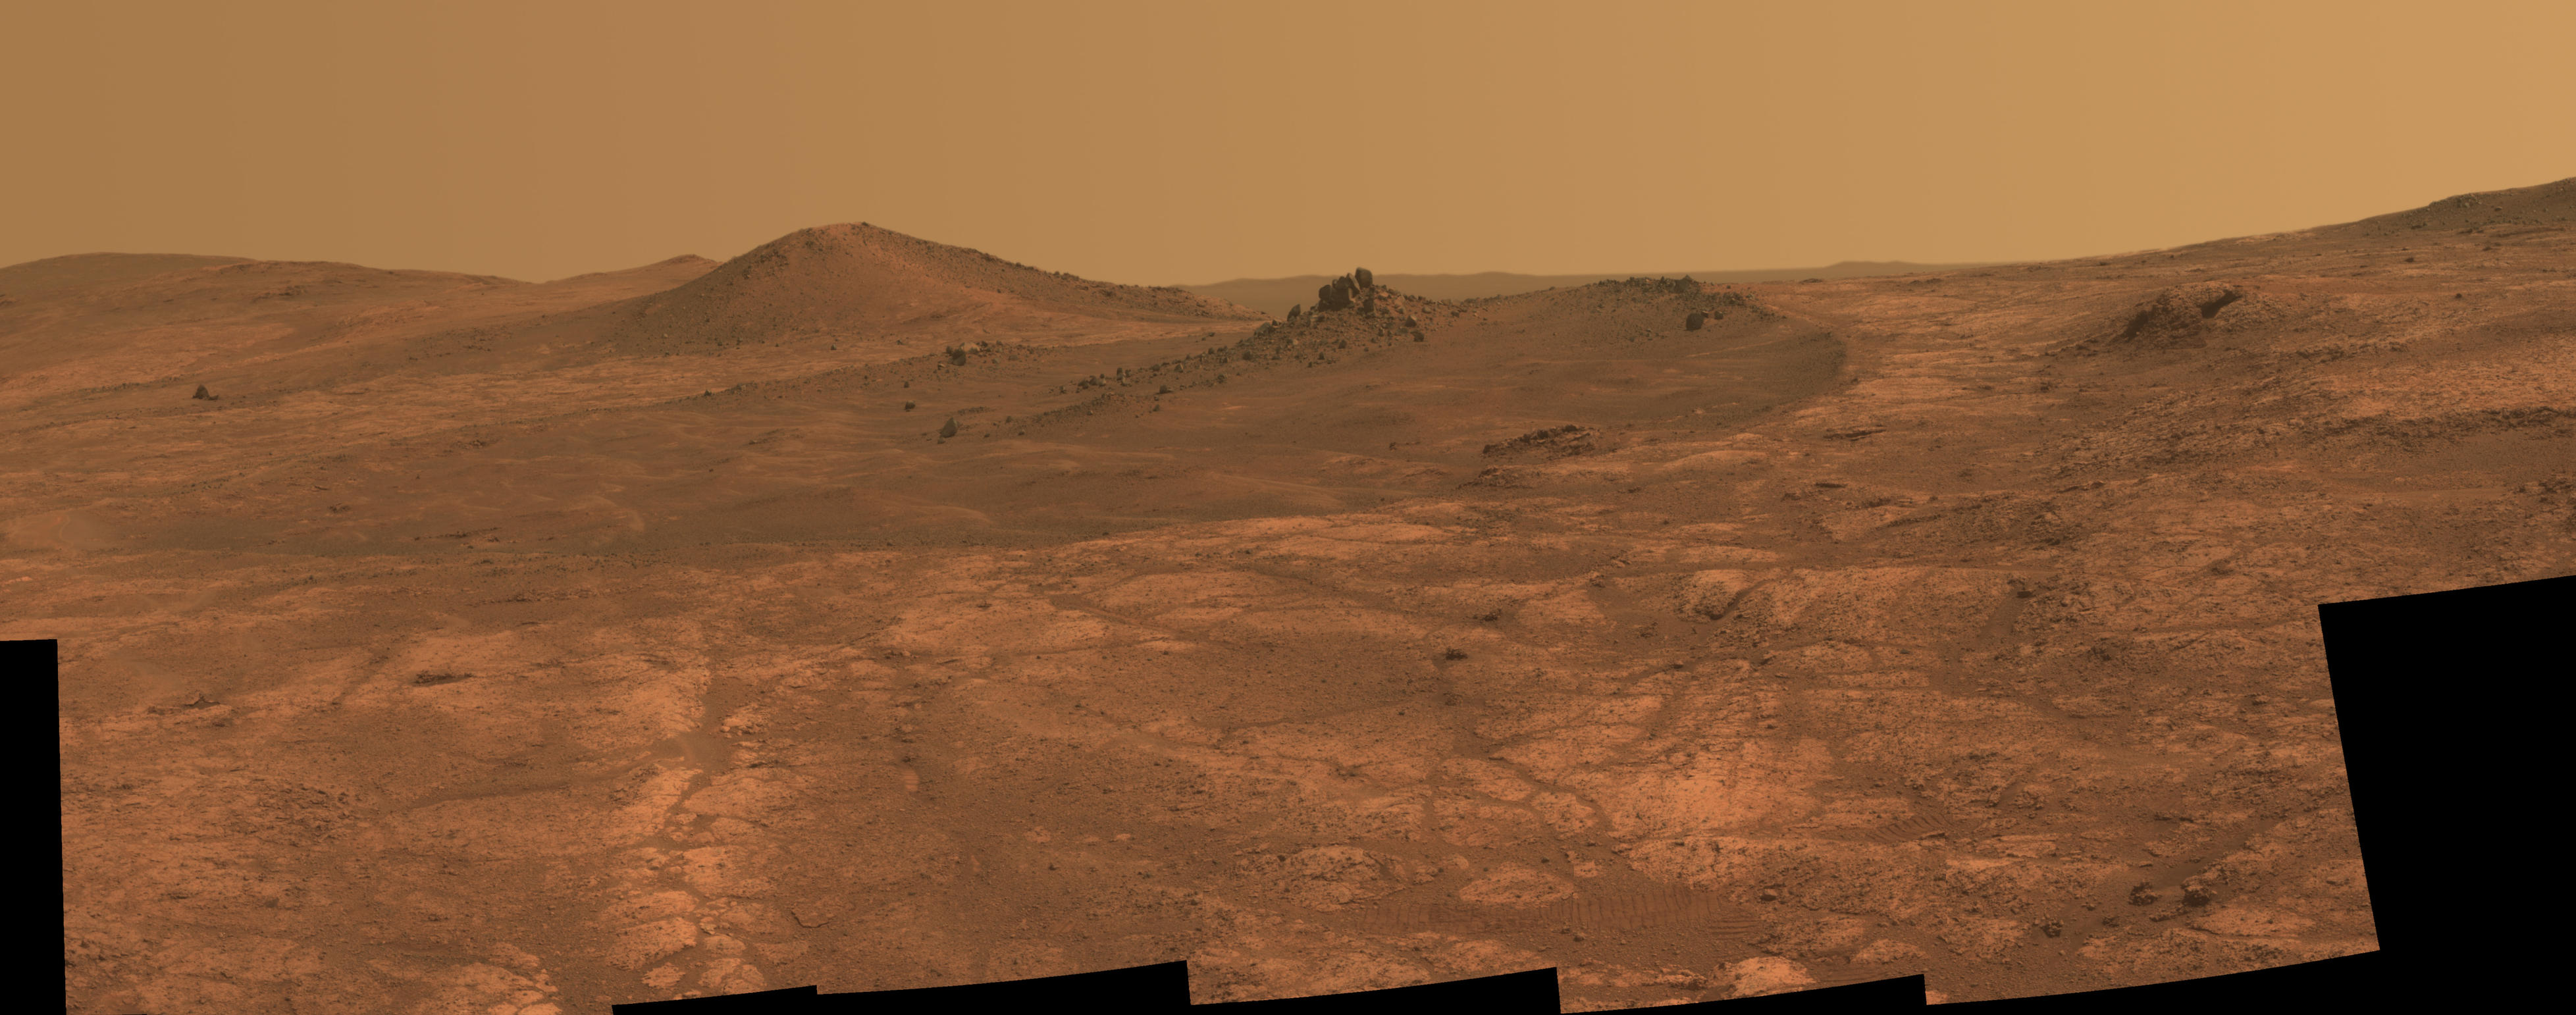 An elongated crater called "Spirit of St. Louis," with a rock spire in it, dominates a recent scene from the panoramic camera (Pancam) on NASA's Mars Exploration Rover Opportunity.